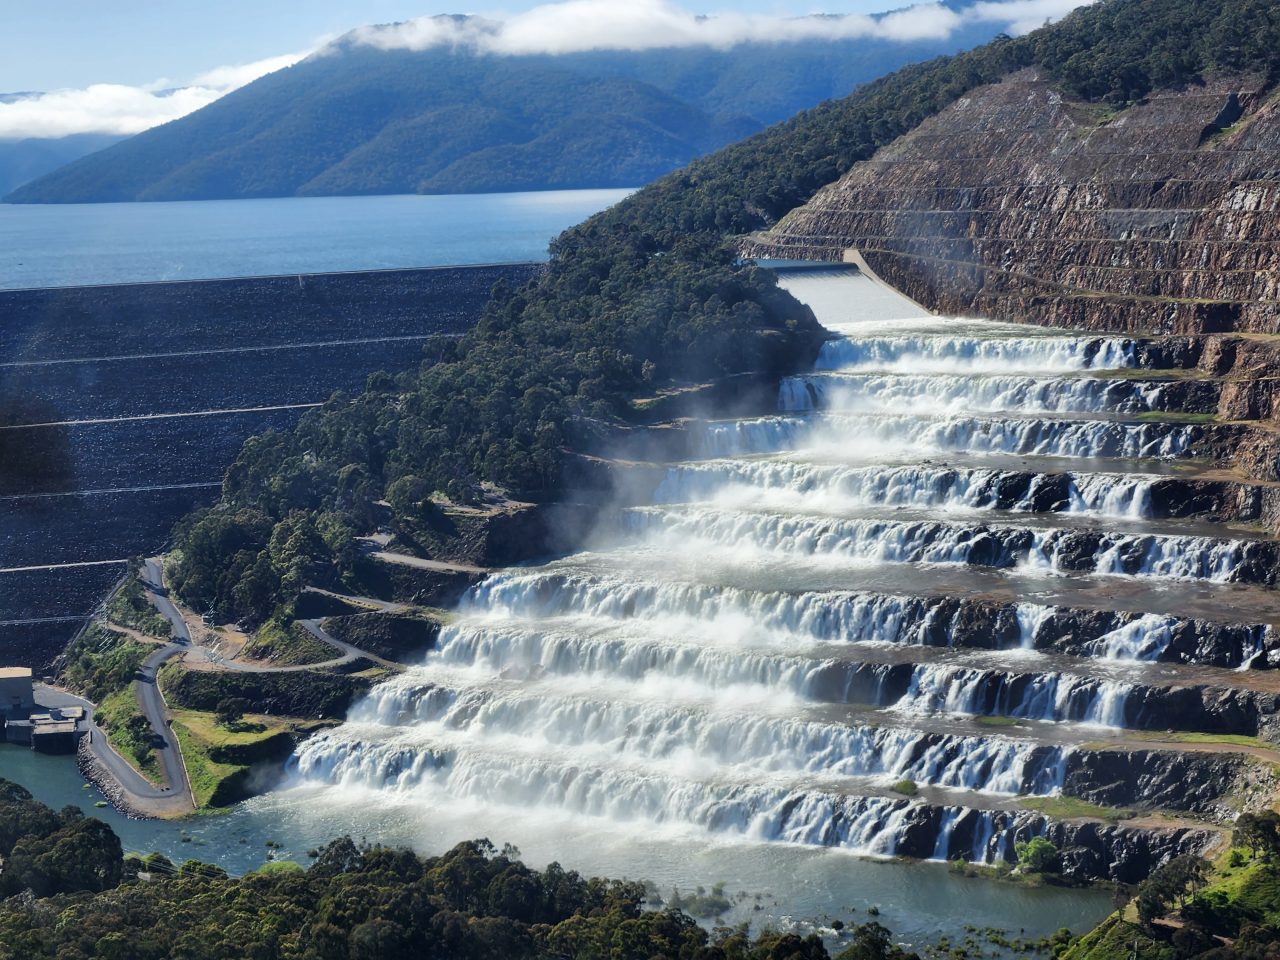 Low aerial photo of a terraced dam spillway covered in white water gushing down like a waterfall into the river below.